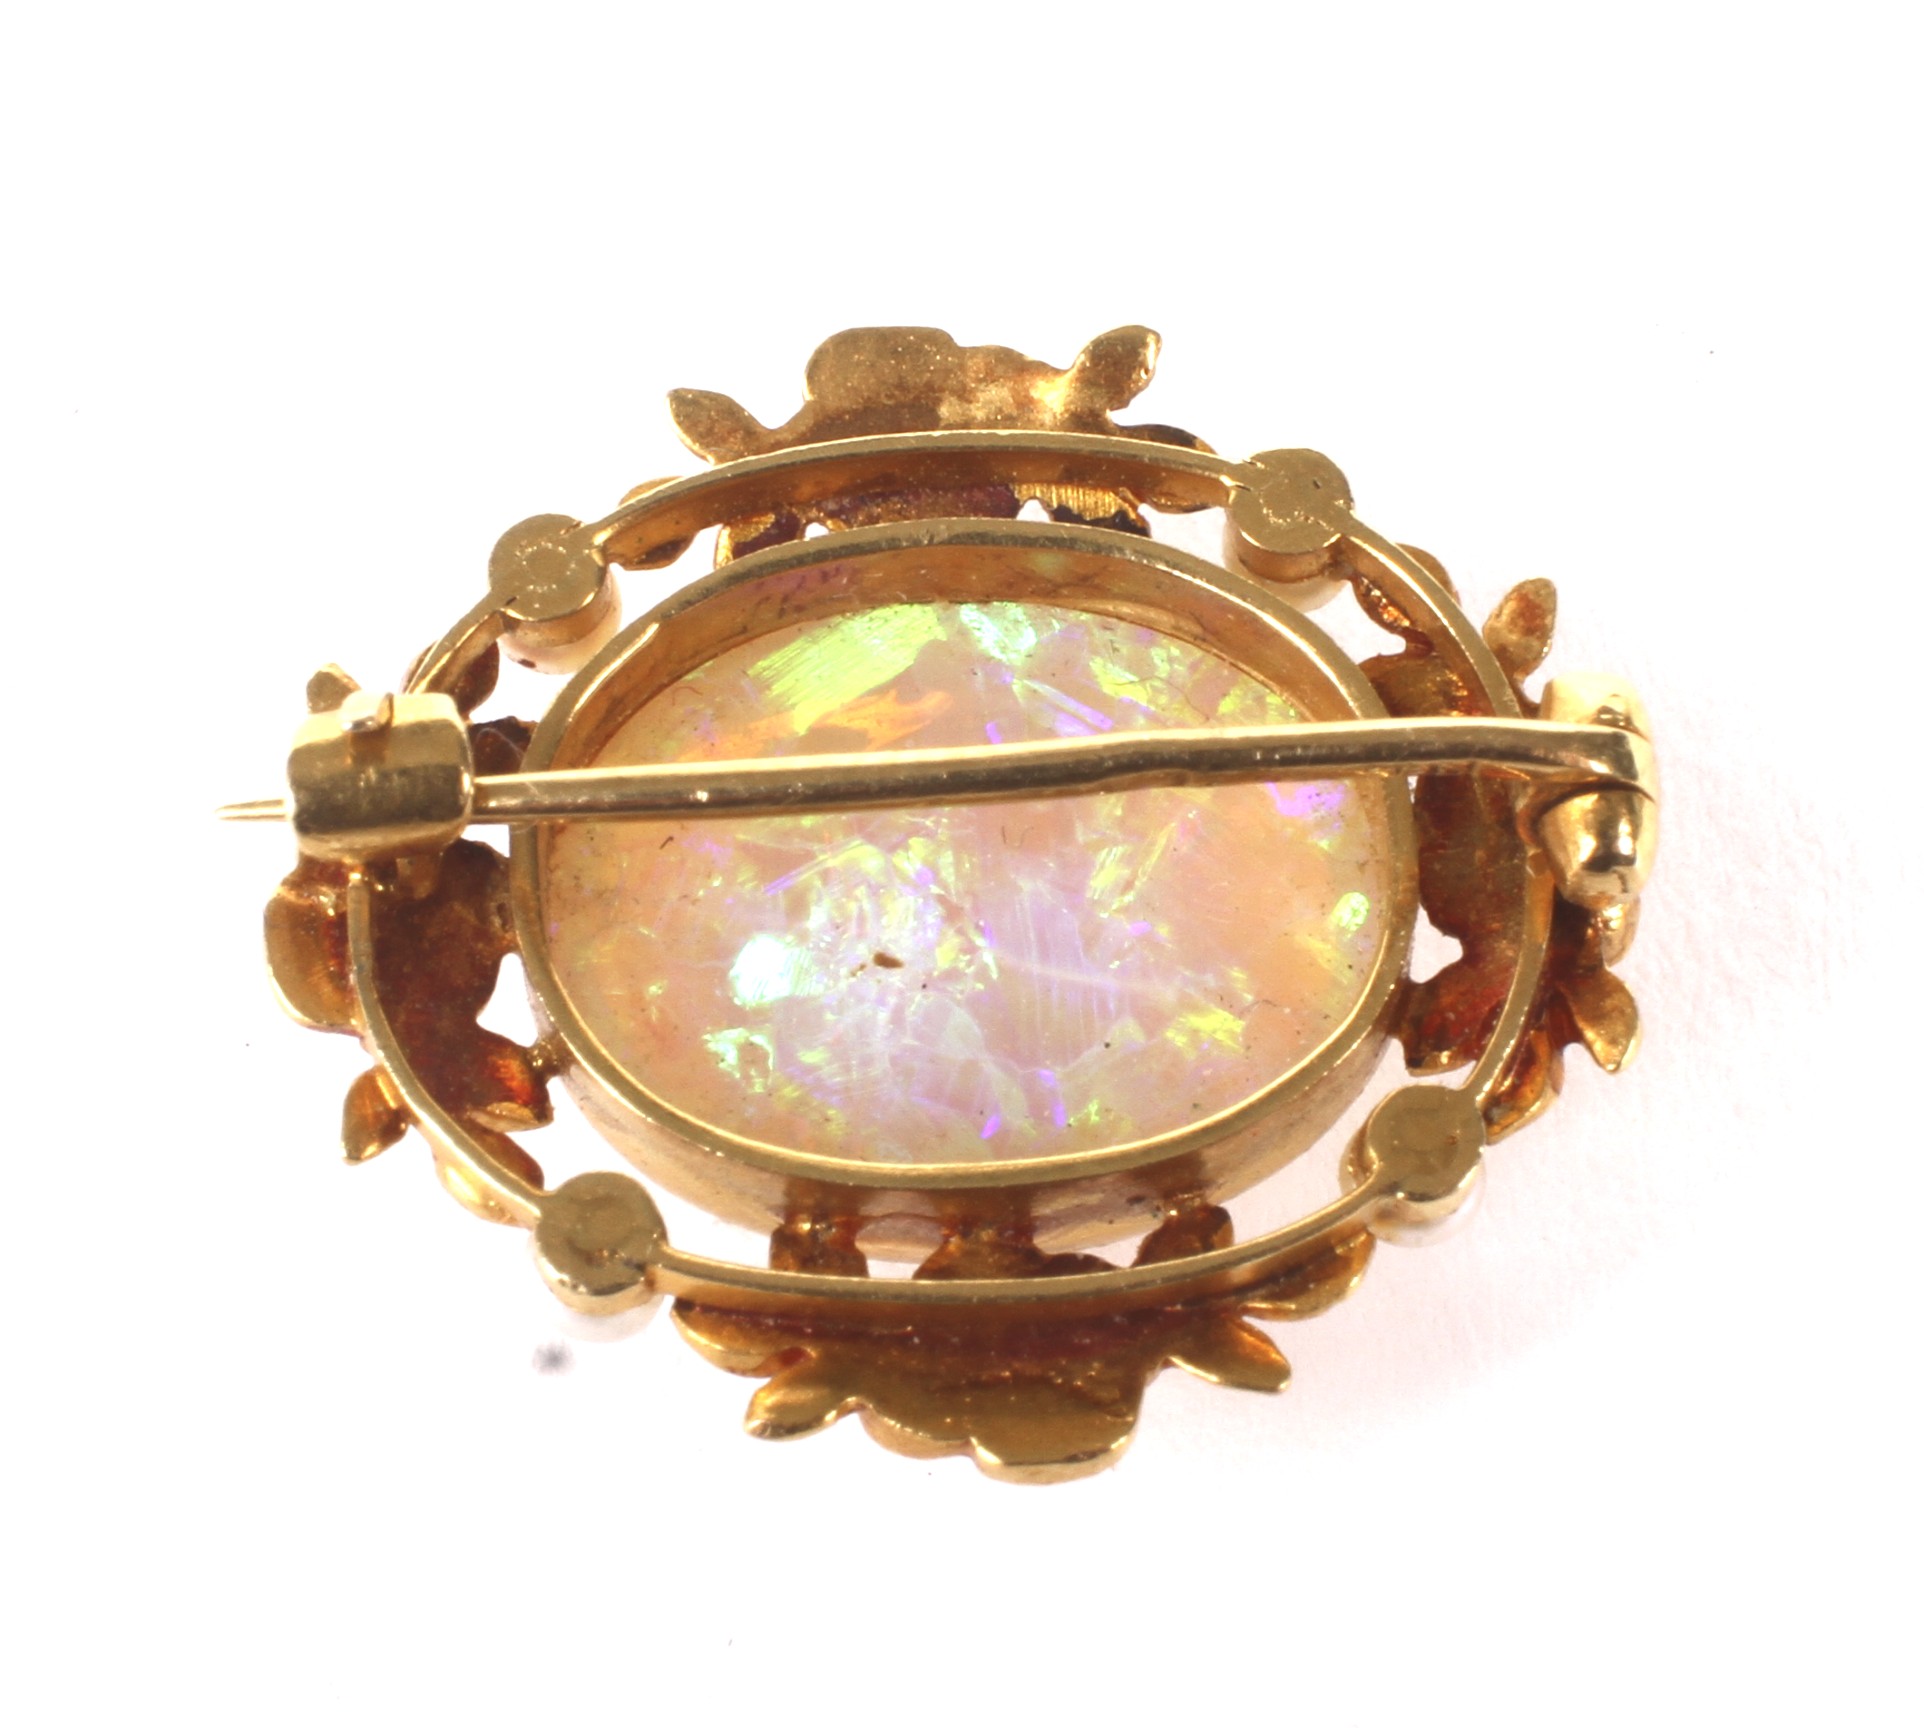 An early 20th century Continental gold, opal and seed-pearl brooch. - Image 4 of 4